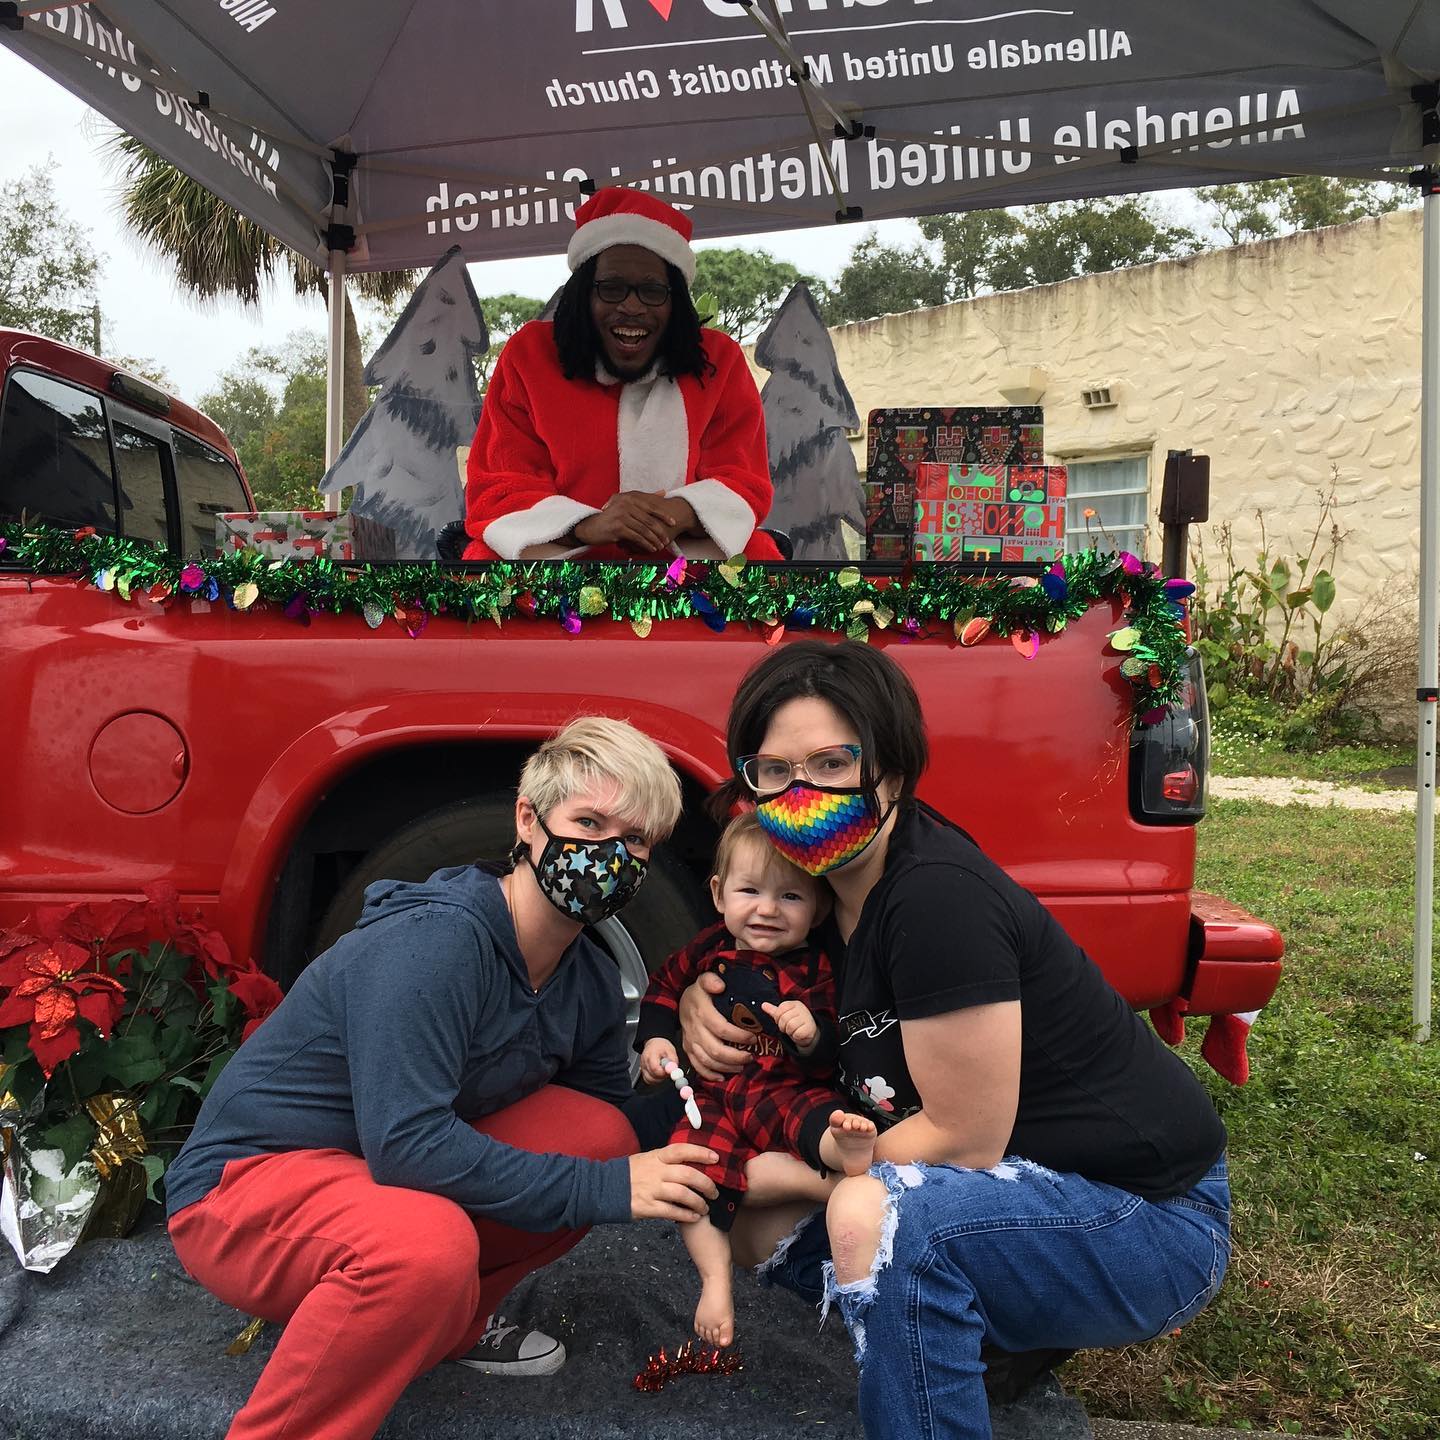 Photo of a two adults squatting and posing with their small child in front of Santa who is sitting in the back of a decorated red pickup truck with a gleeful look on his face. Decorations include presents, Christmas trees and poinsettias. They are outside with the church building in the background and a canopy tent shading the back of the truck.